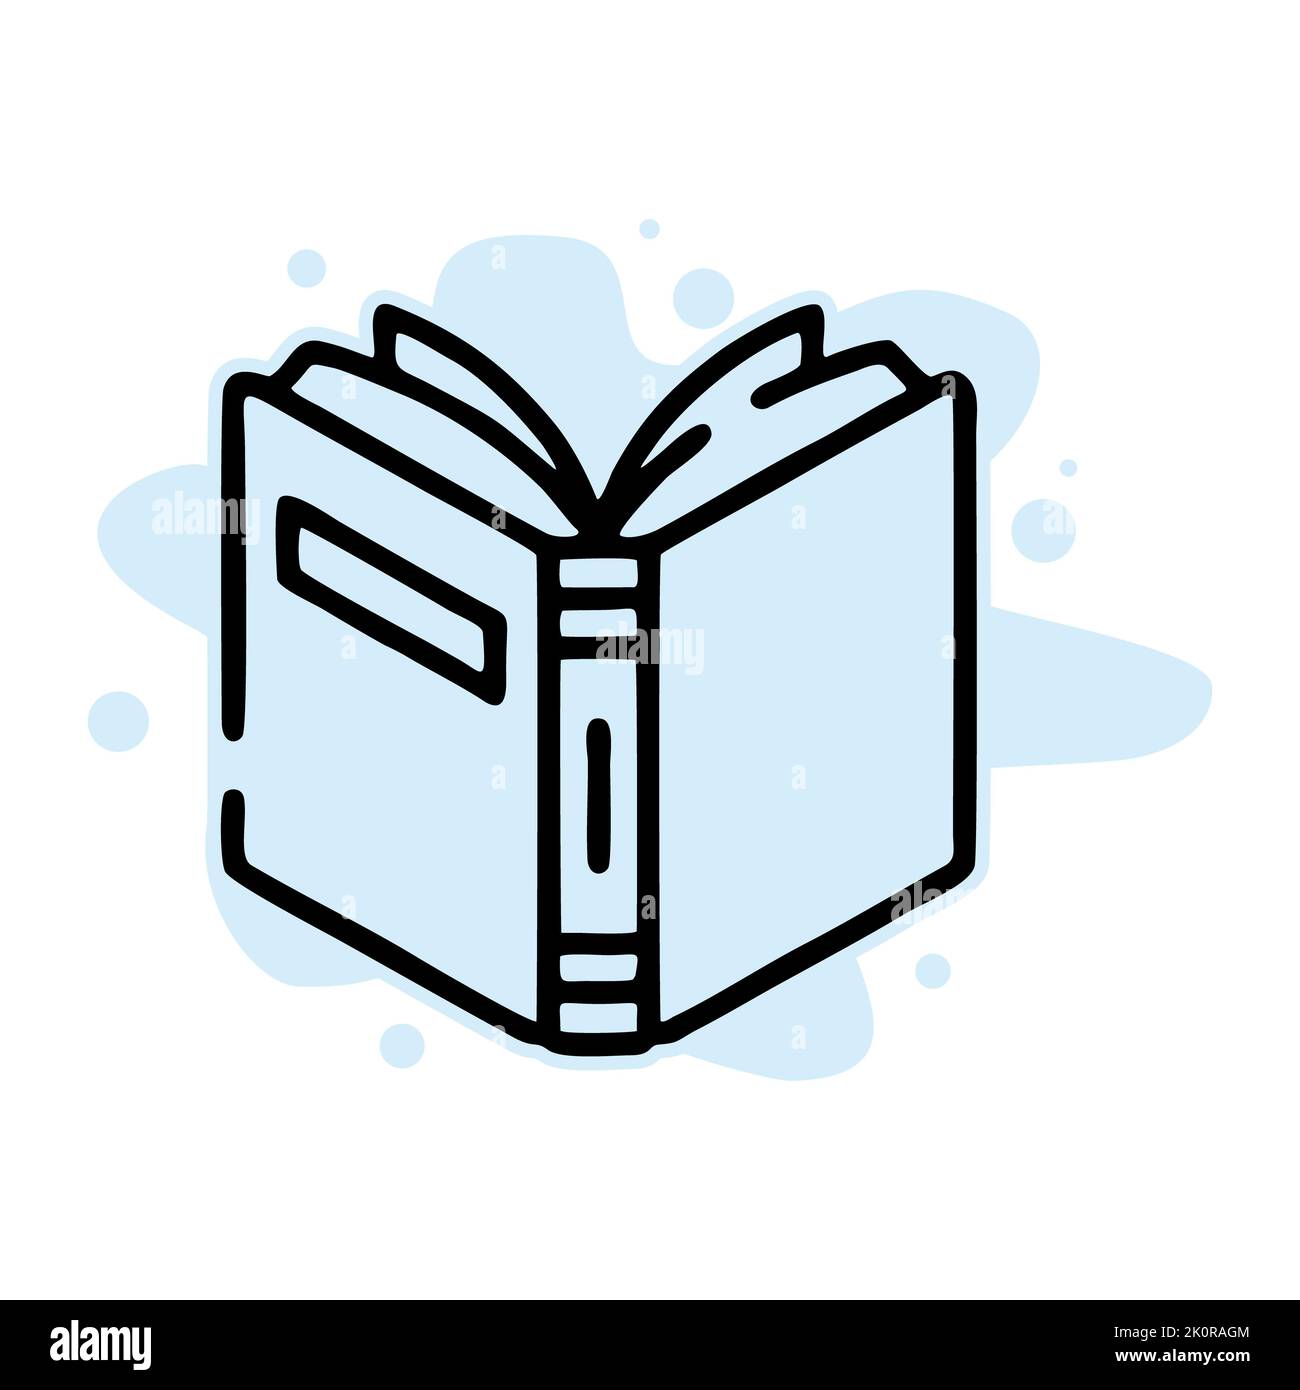 Open book clipart set symbol icon design isolated Vector Image